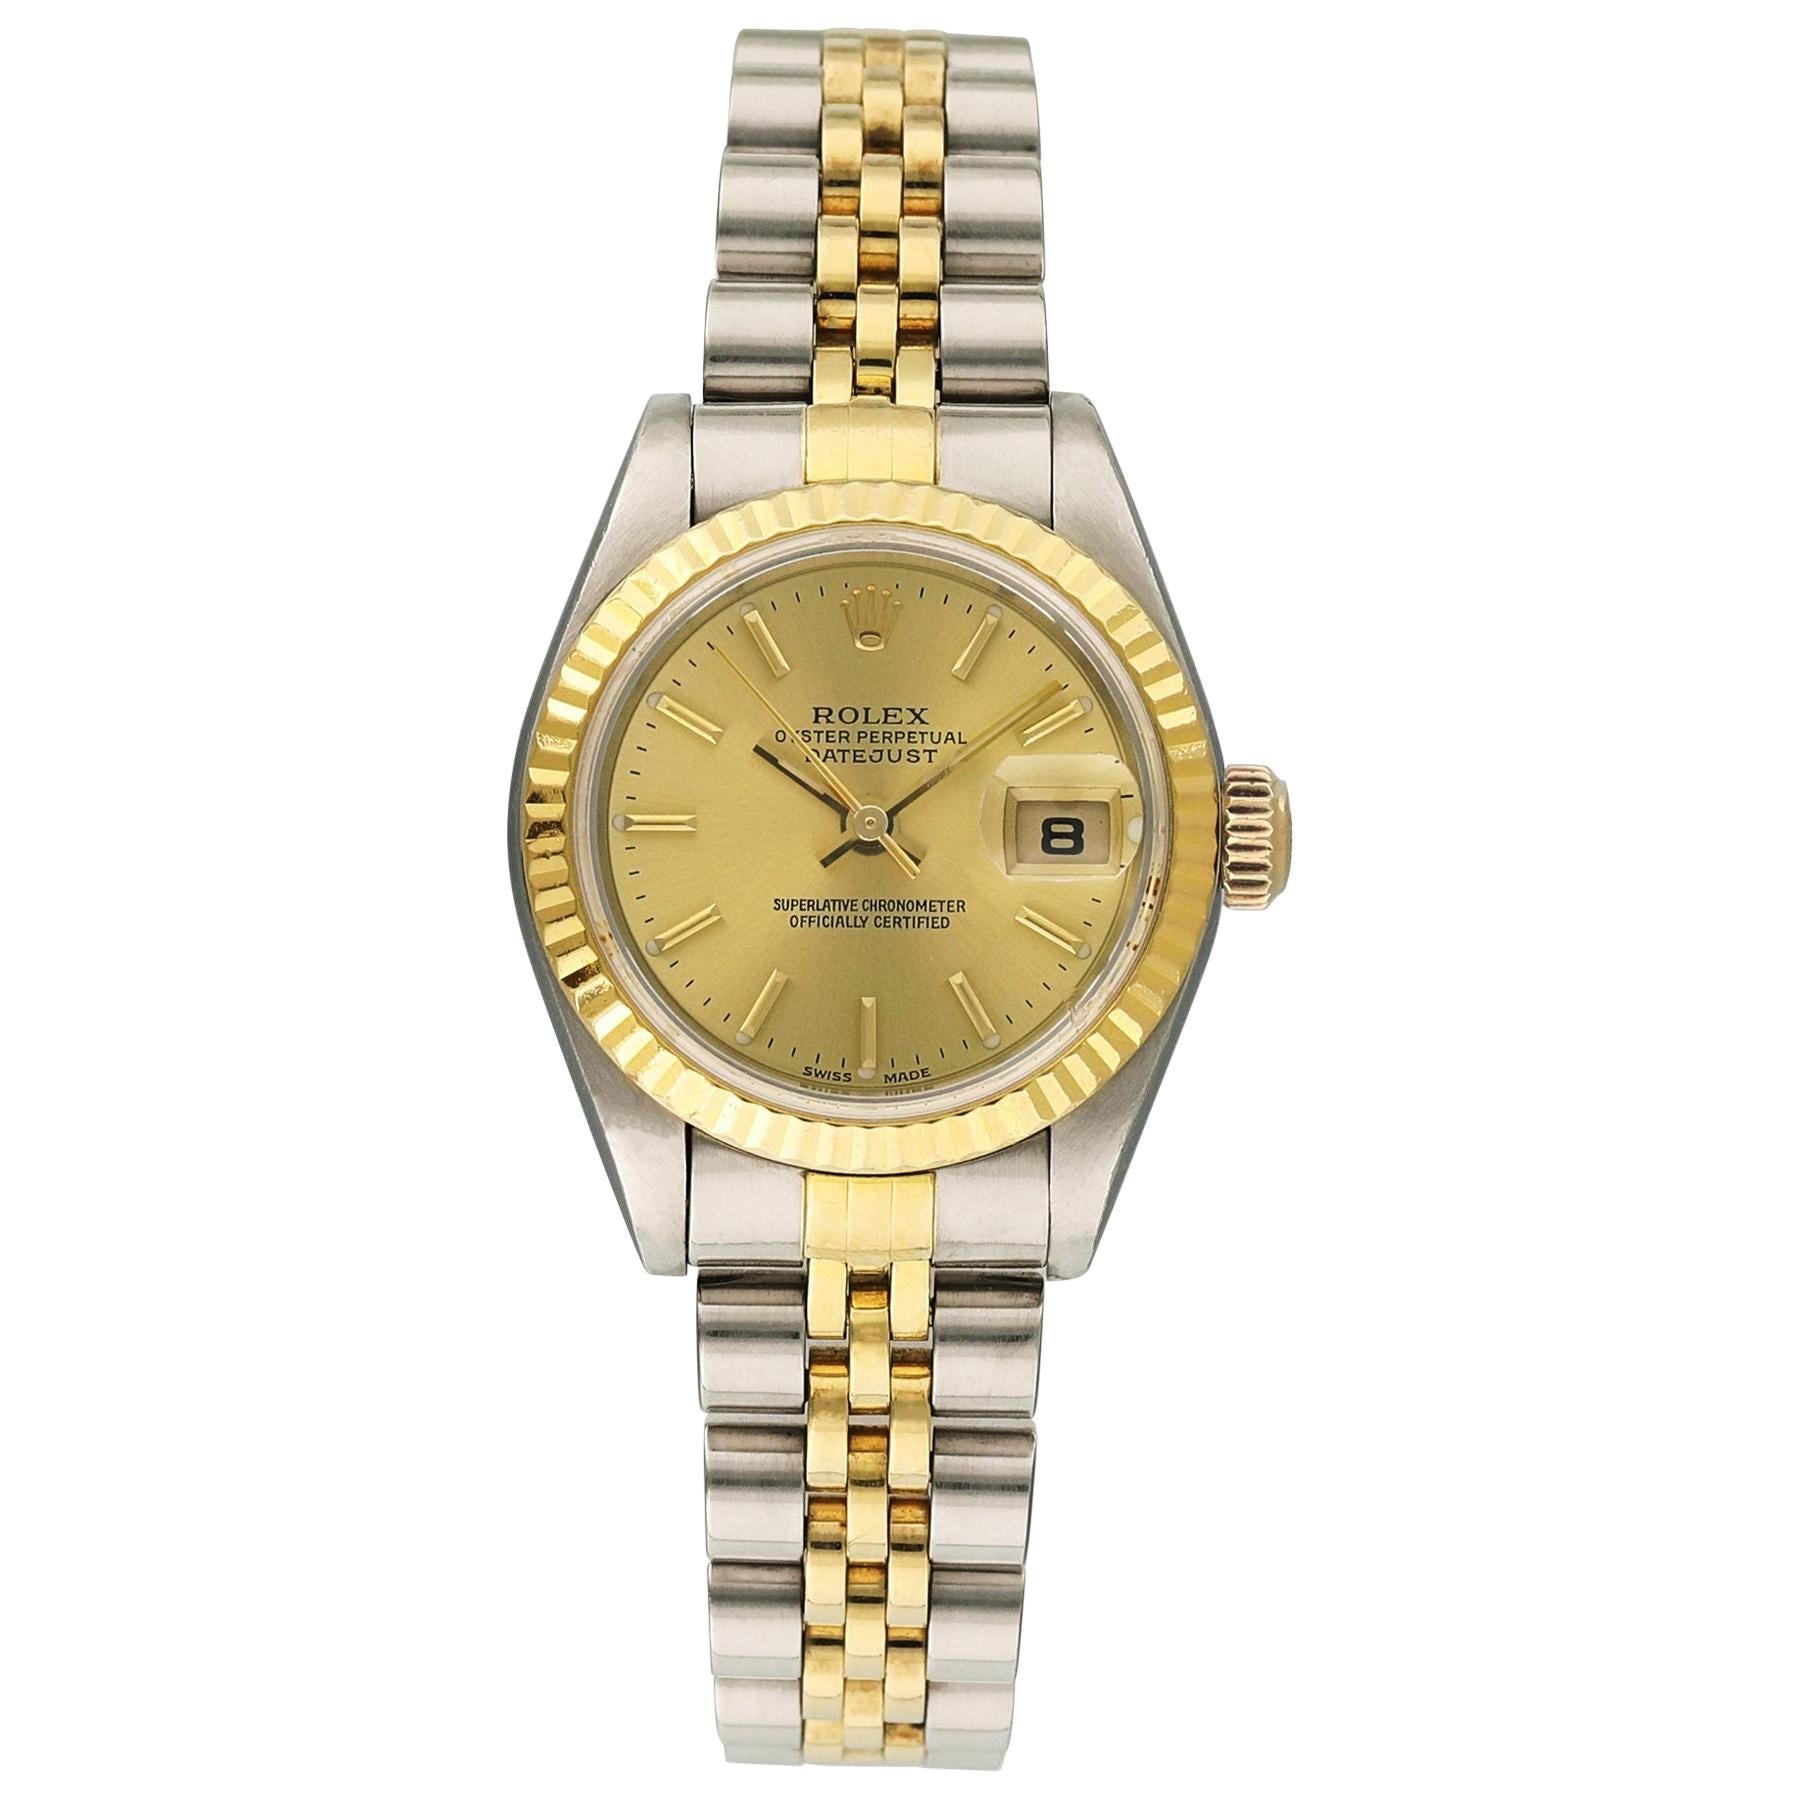 Rolex Oyster Perpetual Datejust 69173 Ladies Watch For Sale